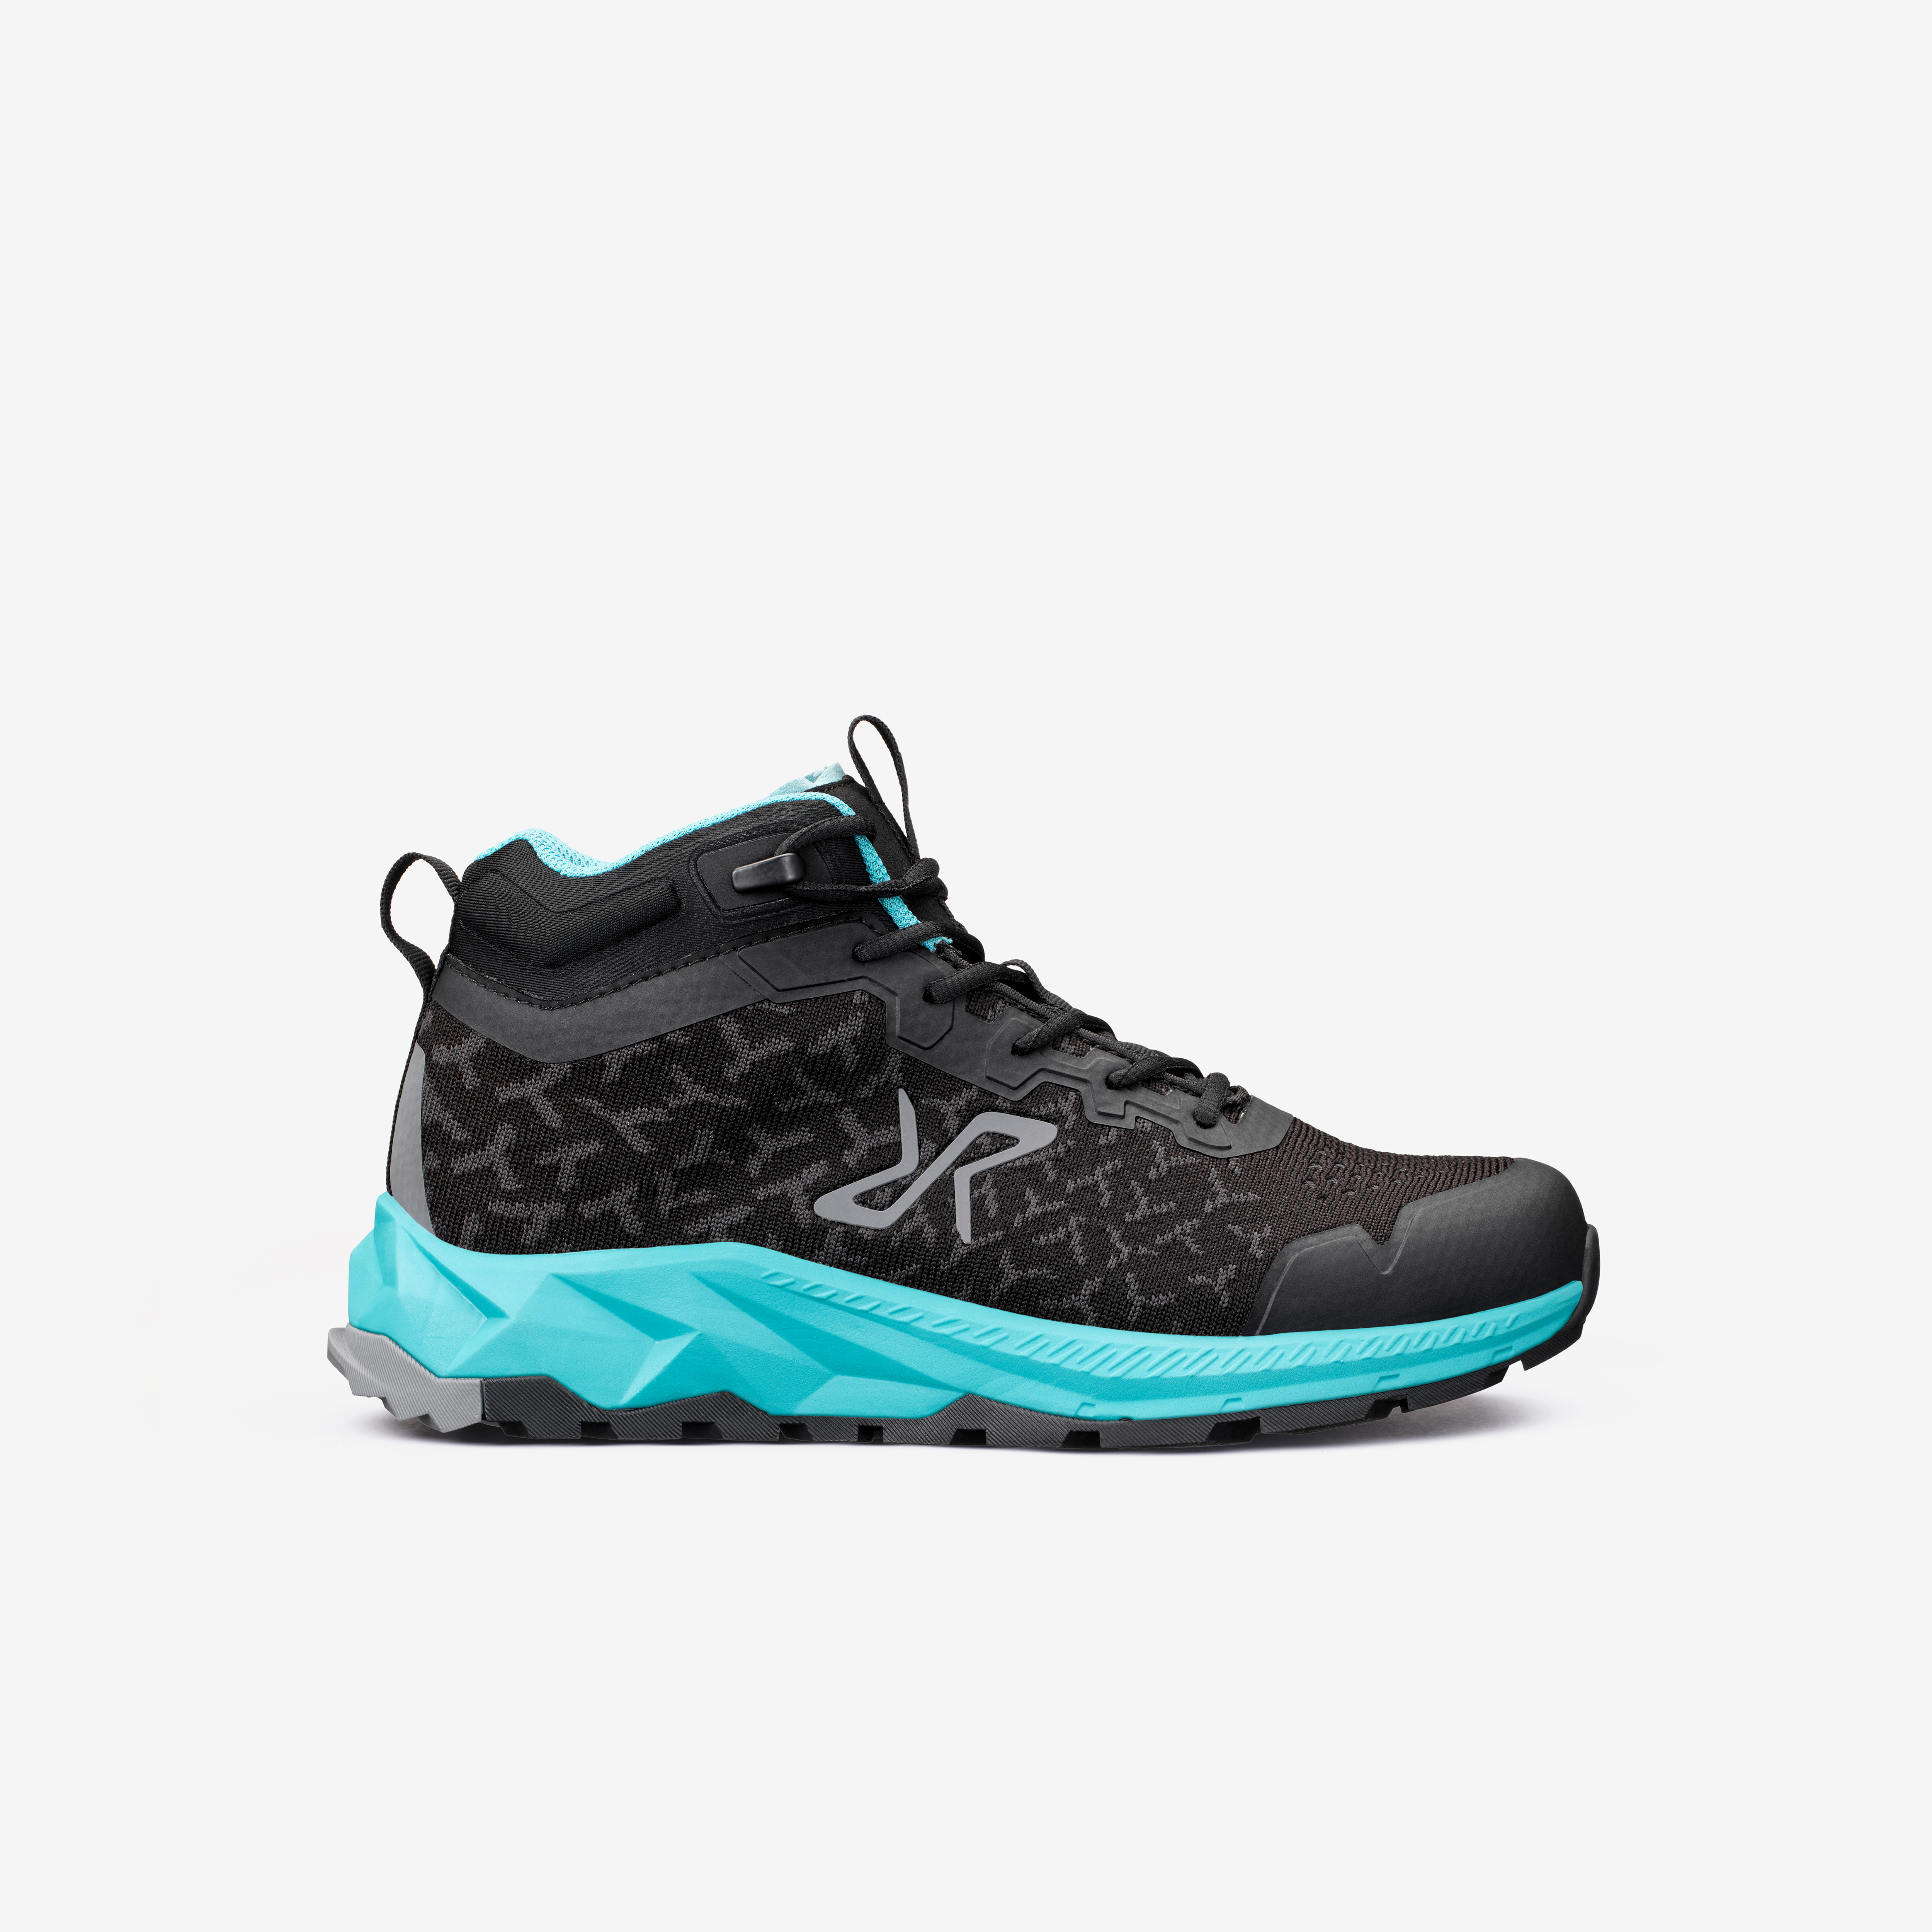 Trailknit Waterproof Mid Hiking Shoes Black/Turquoise Mujeres